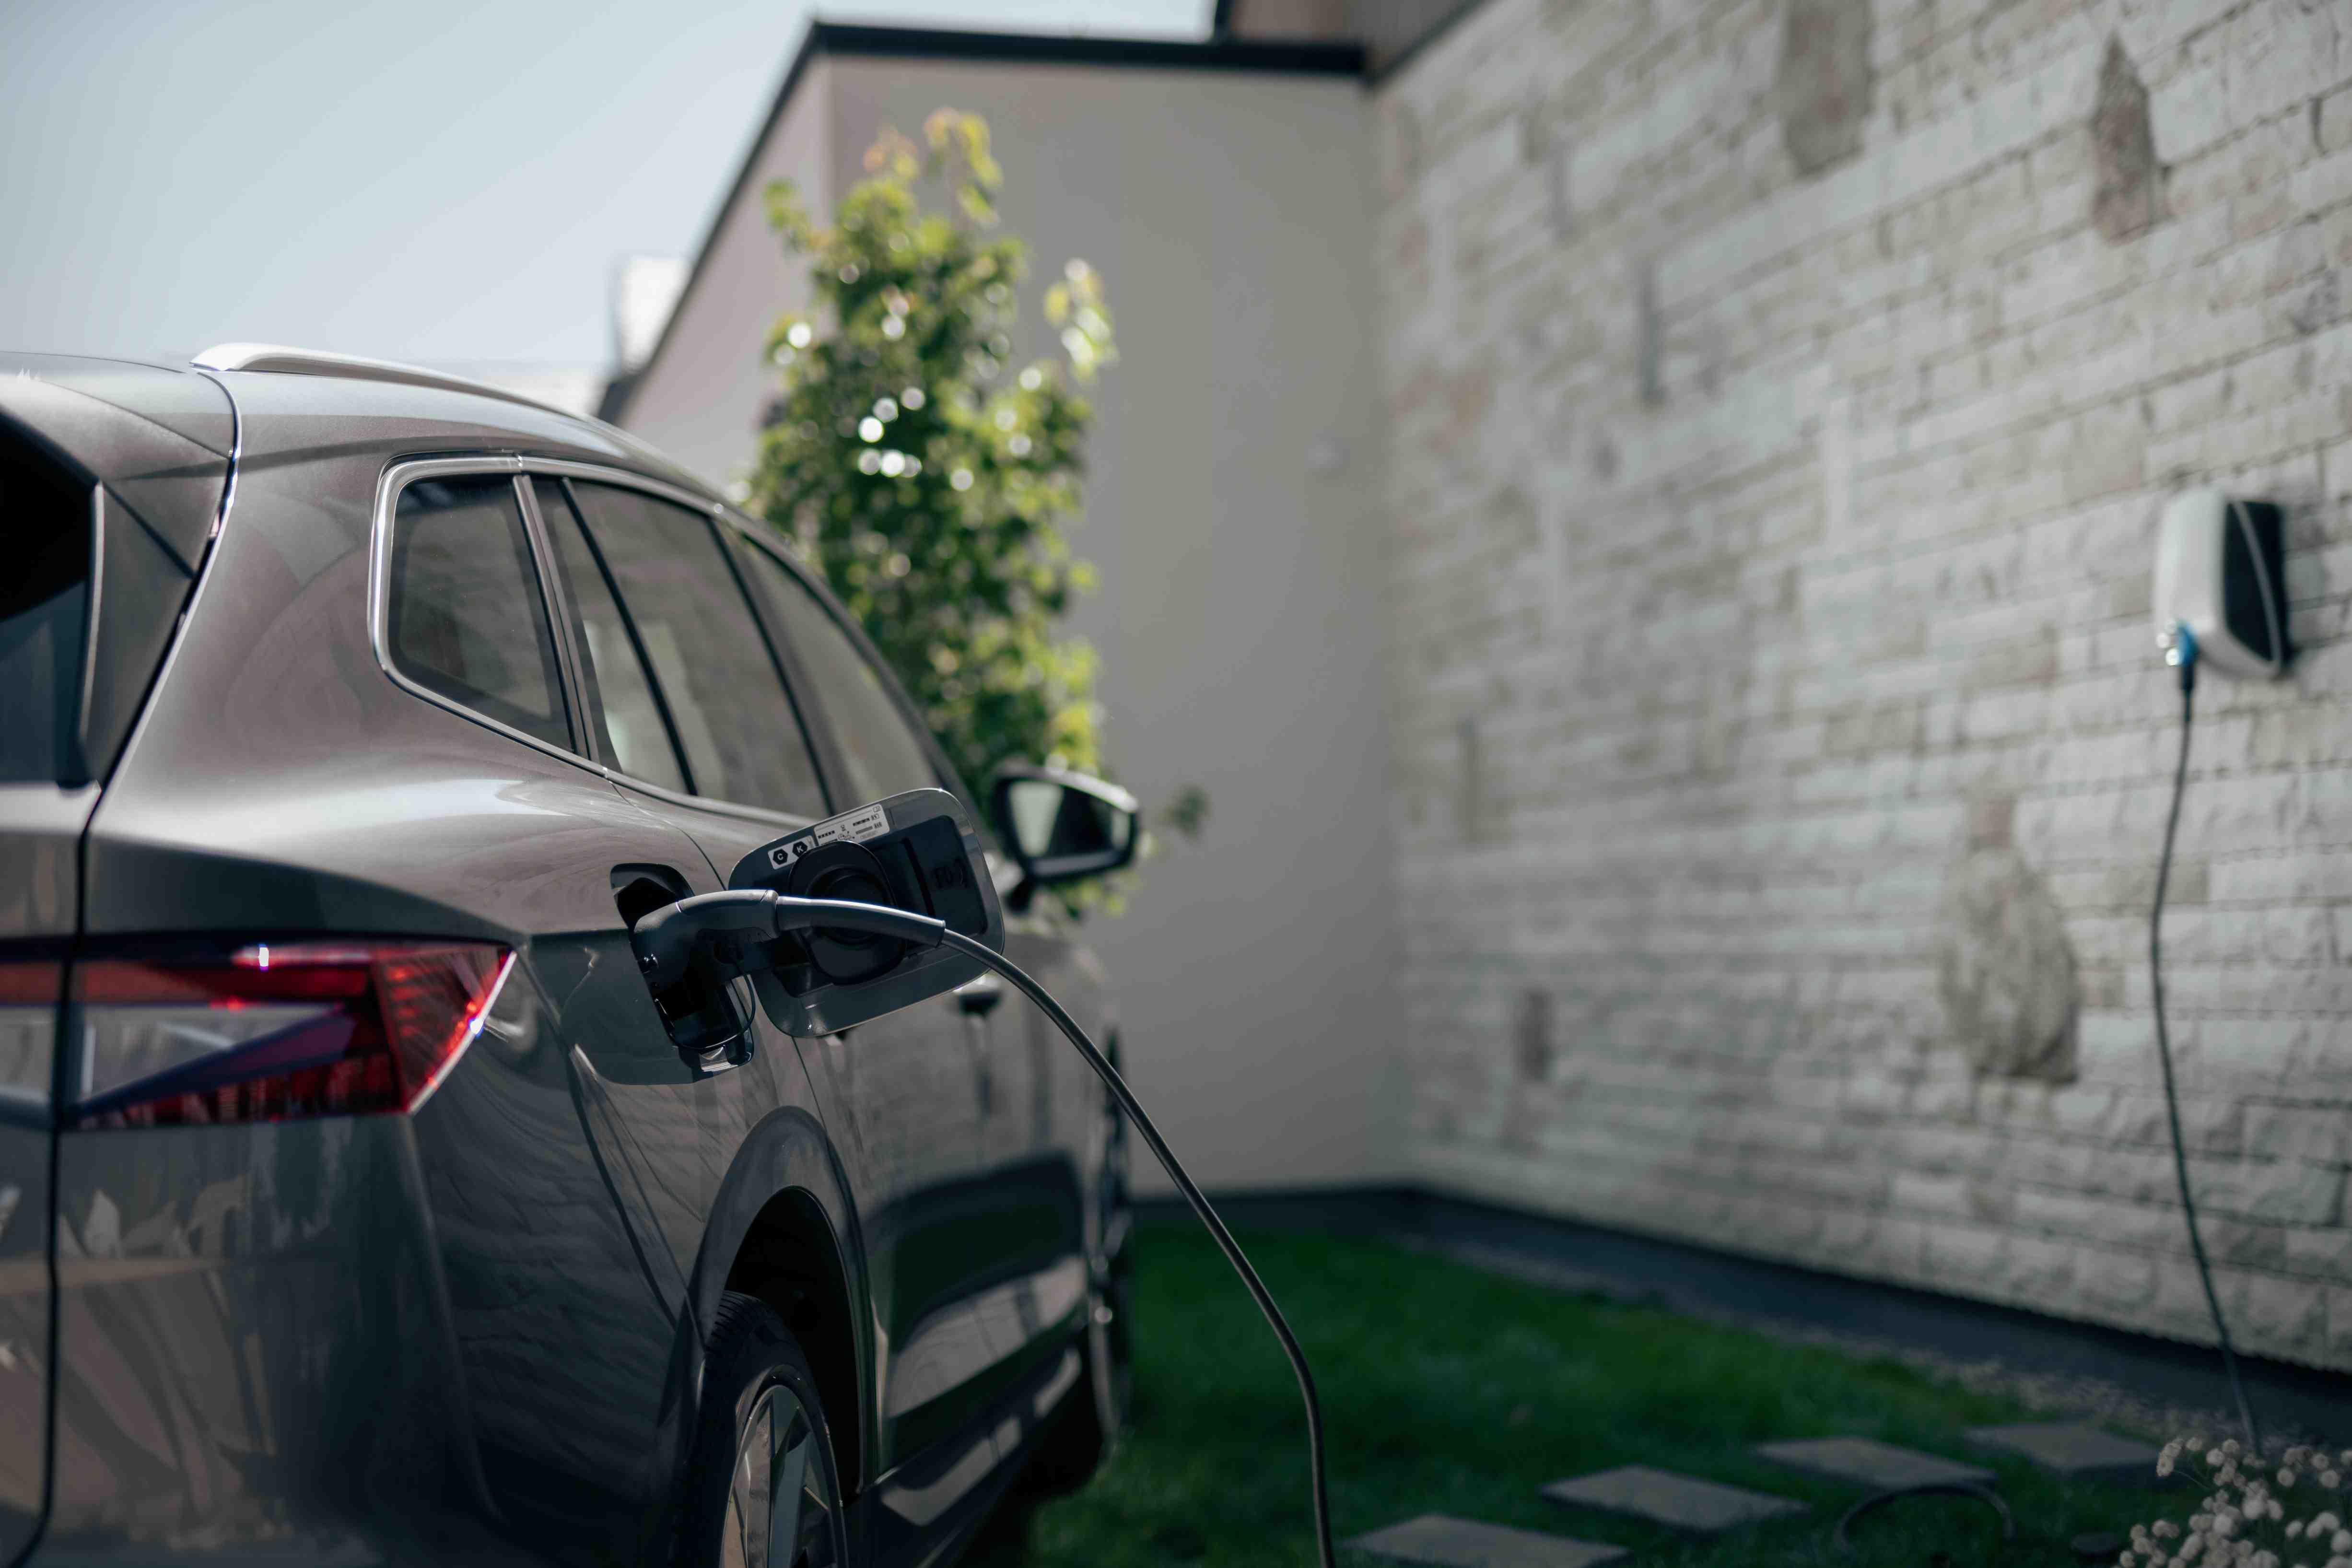 An electric SUV parked in the driveway and is connected to the Elvi home charging station mounted on the brick wall.